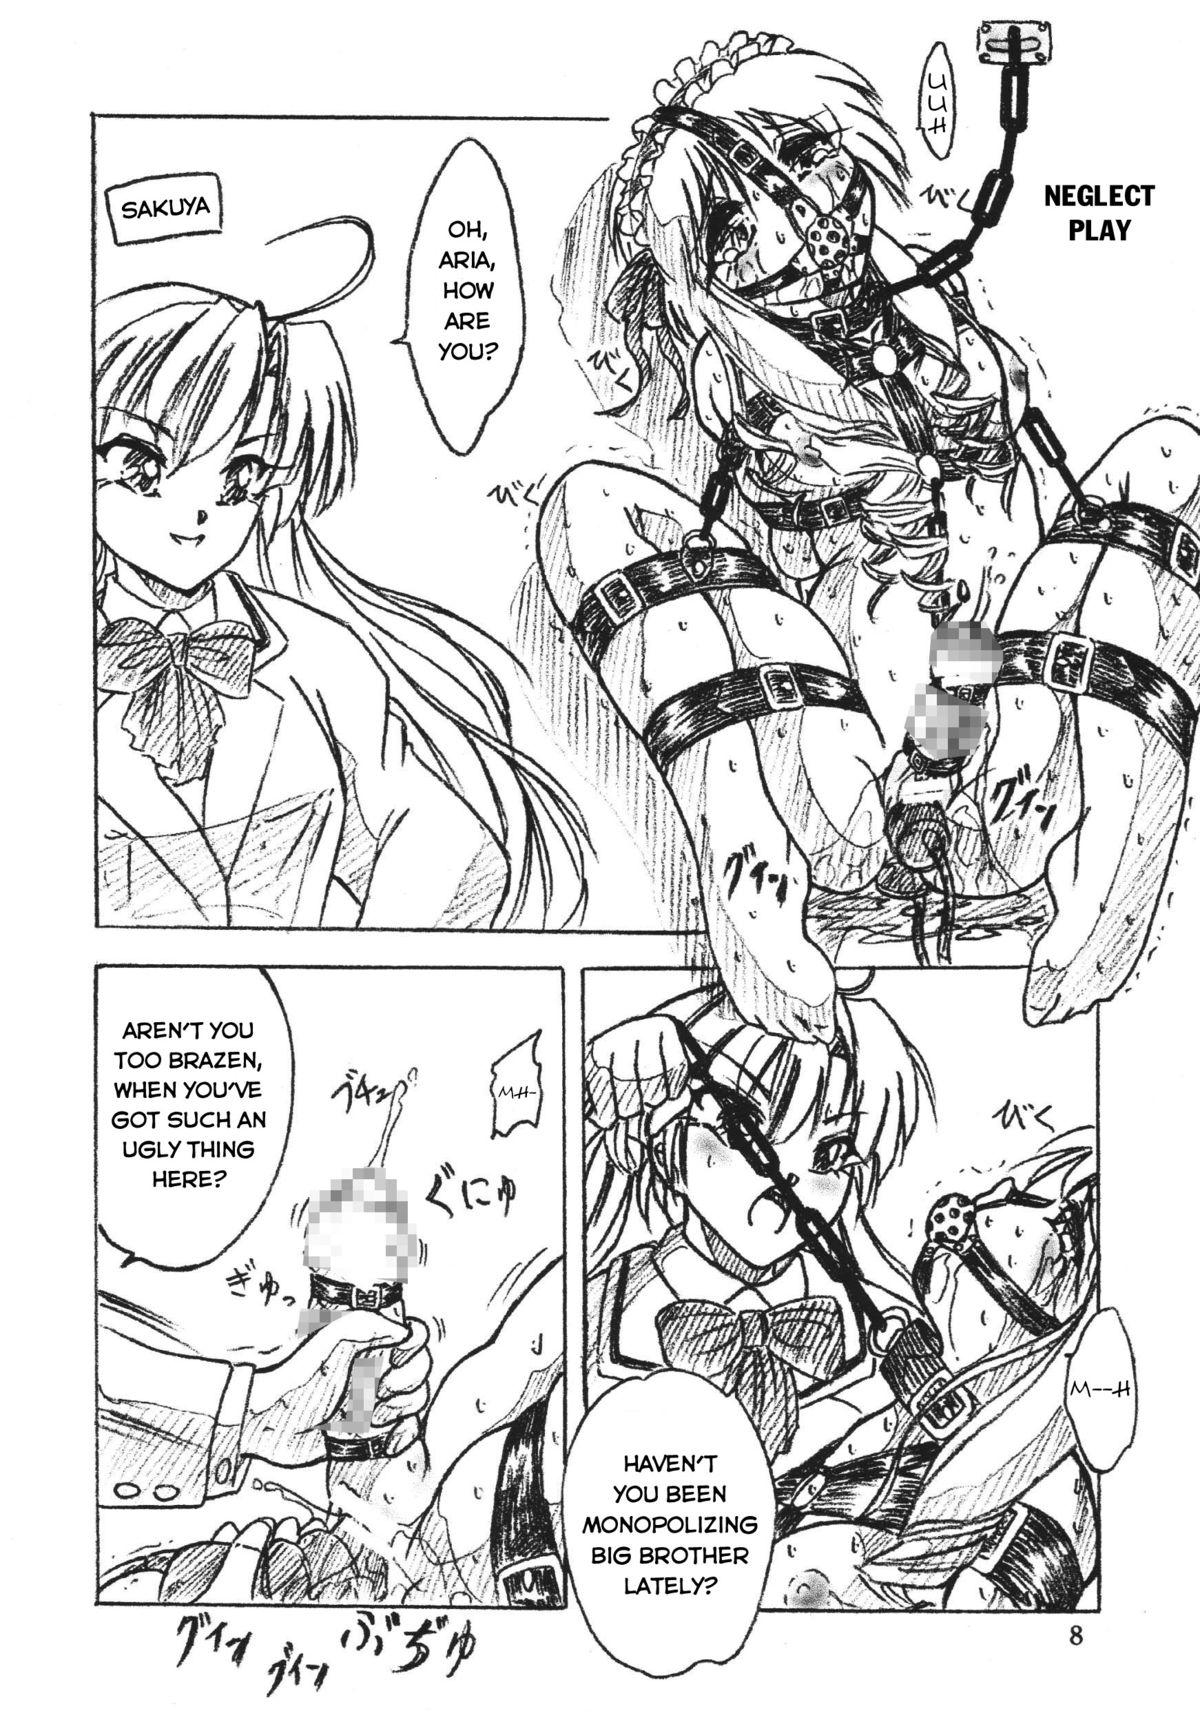 Finger Majo Gari | Witch Hunt - Chobits Tokyo mew mew Sapphic Erotica - Page 8